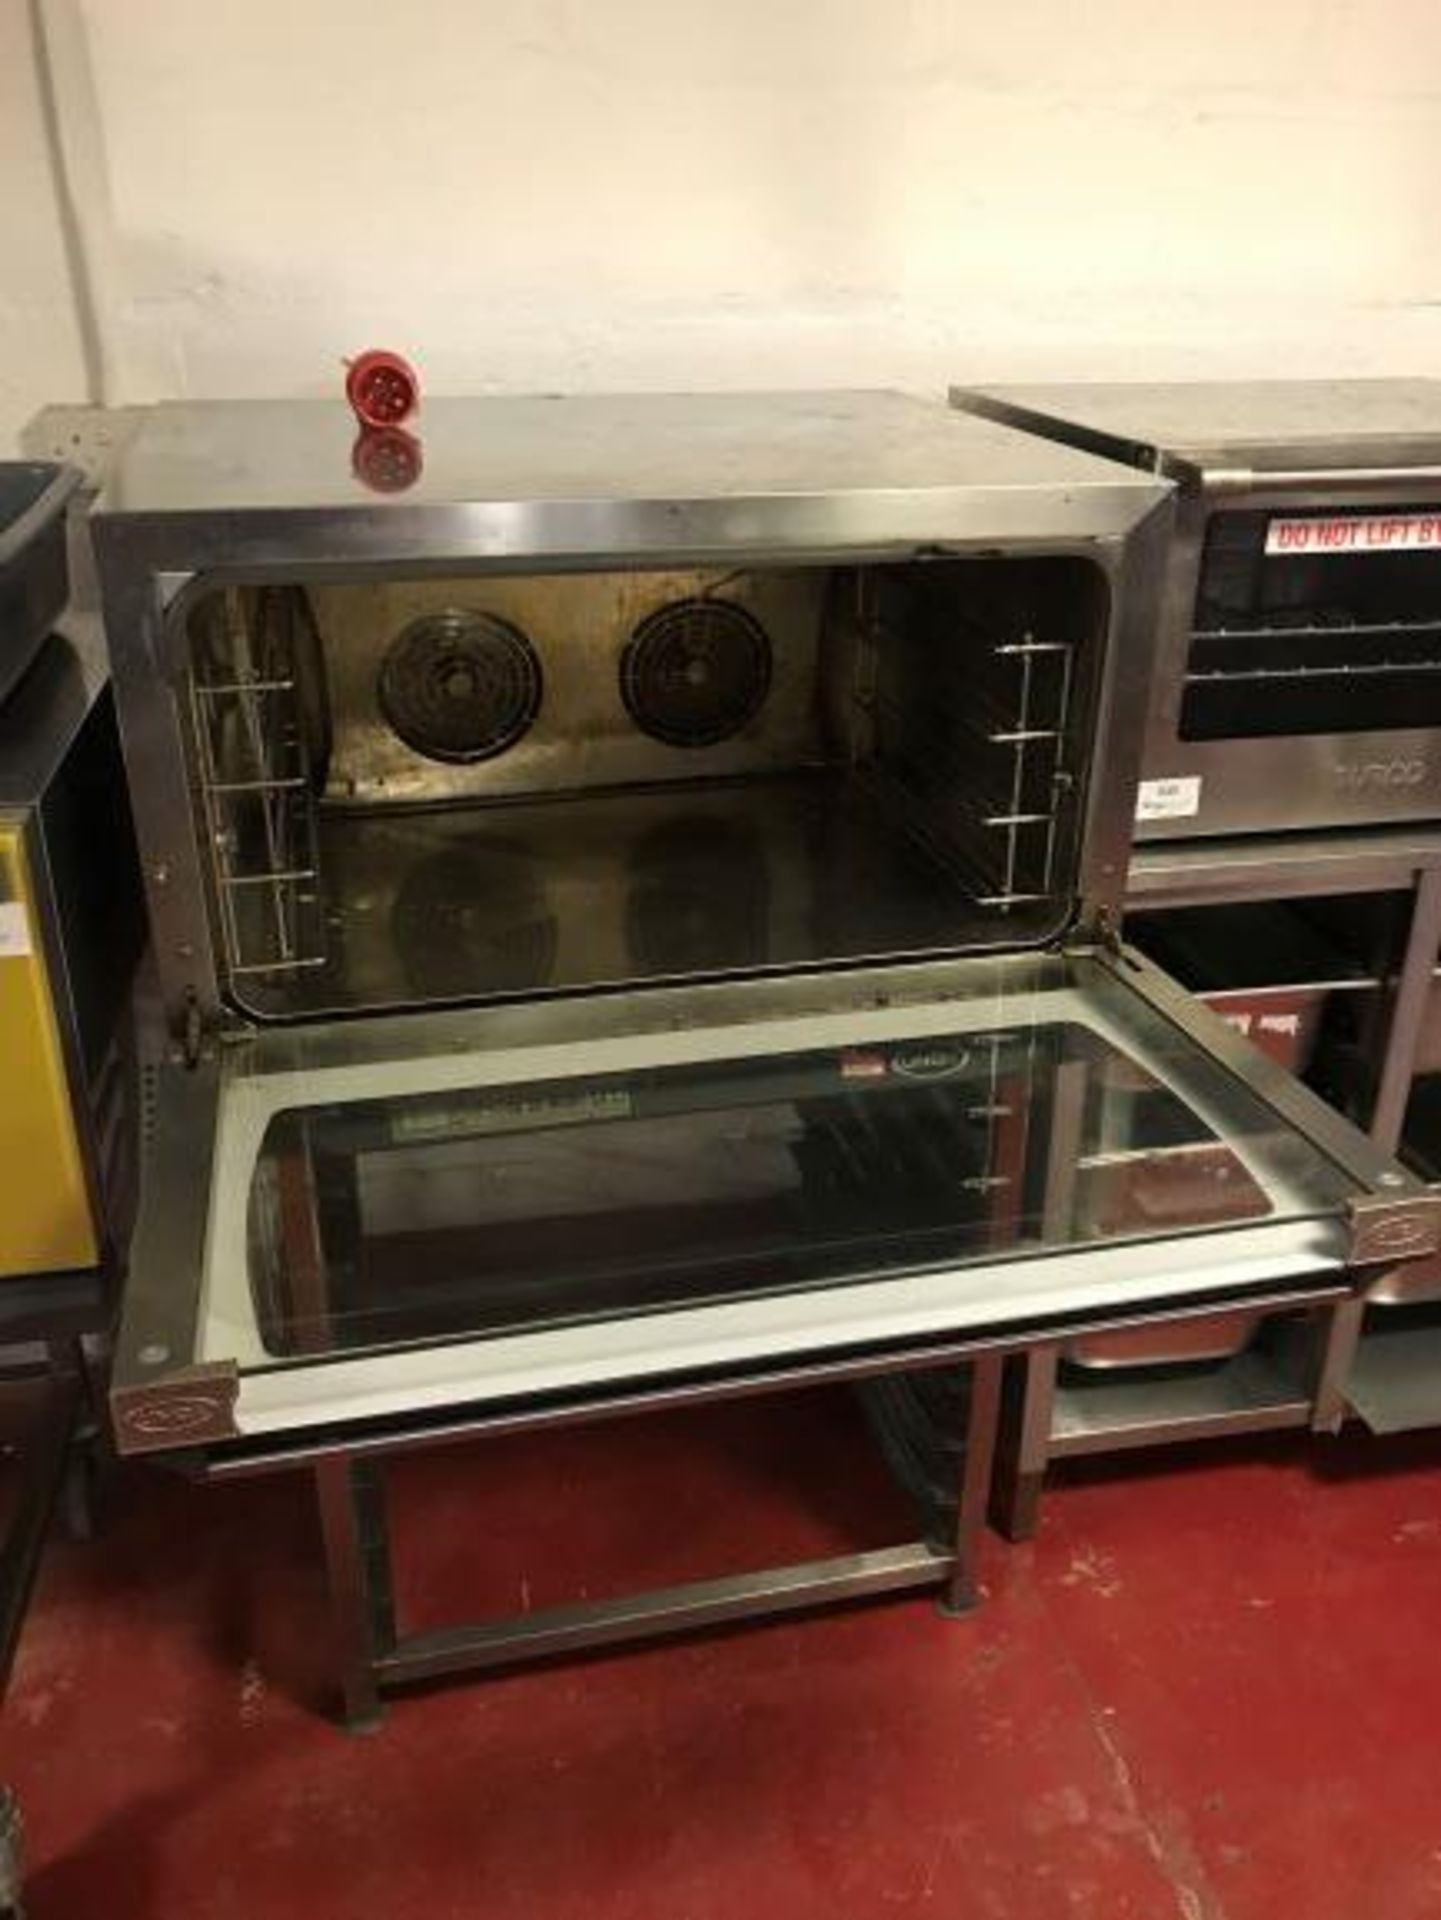 Unox Rosella XF190-B professional manual convection bakery oven - Image 2 of 4